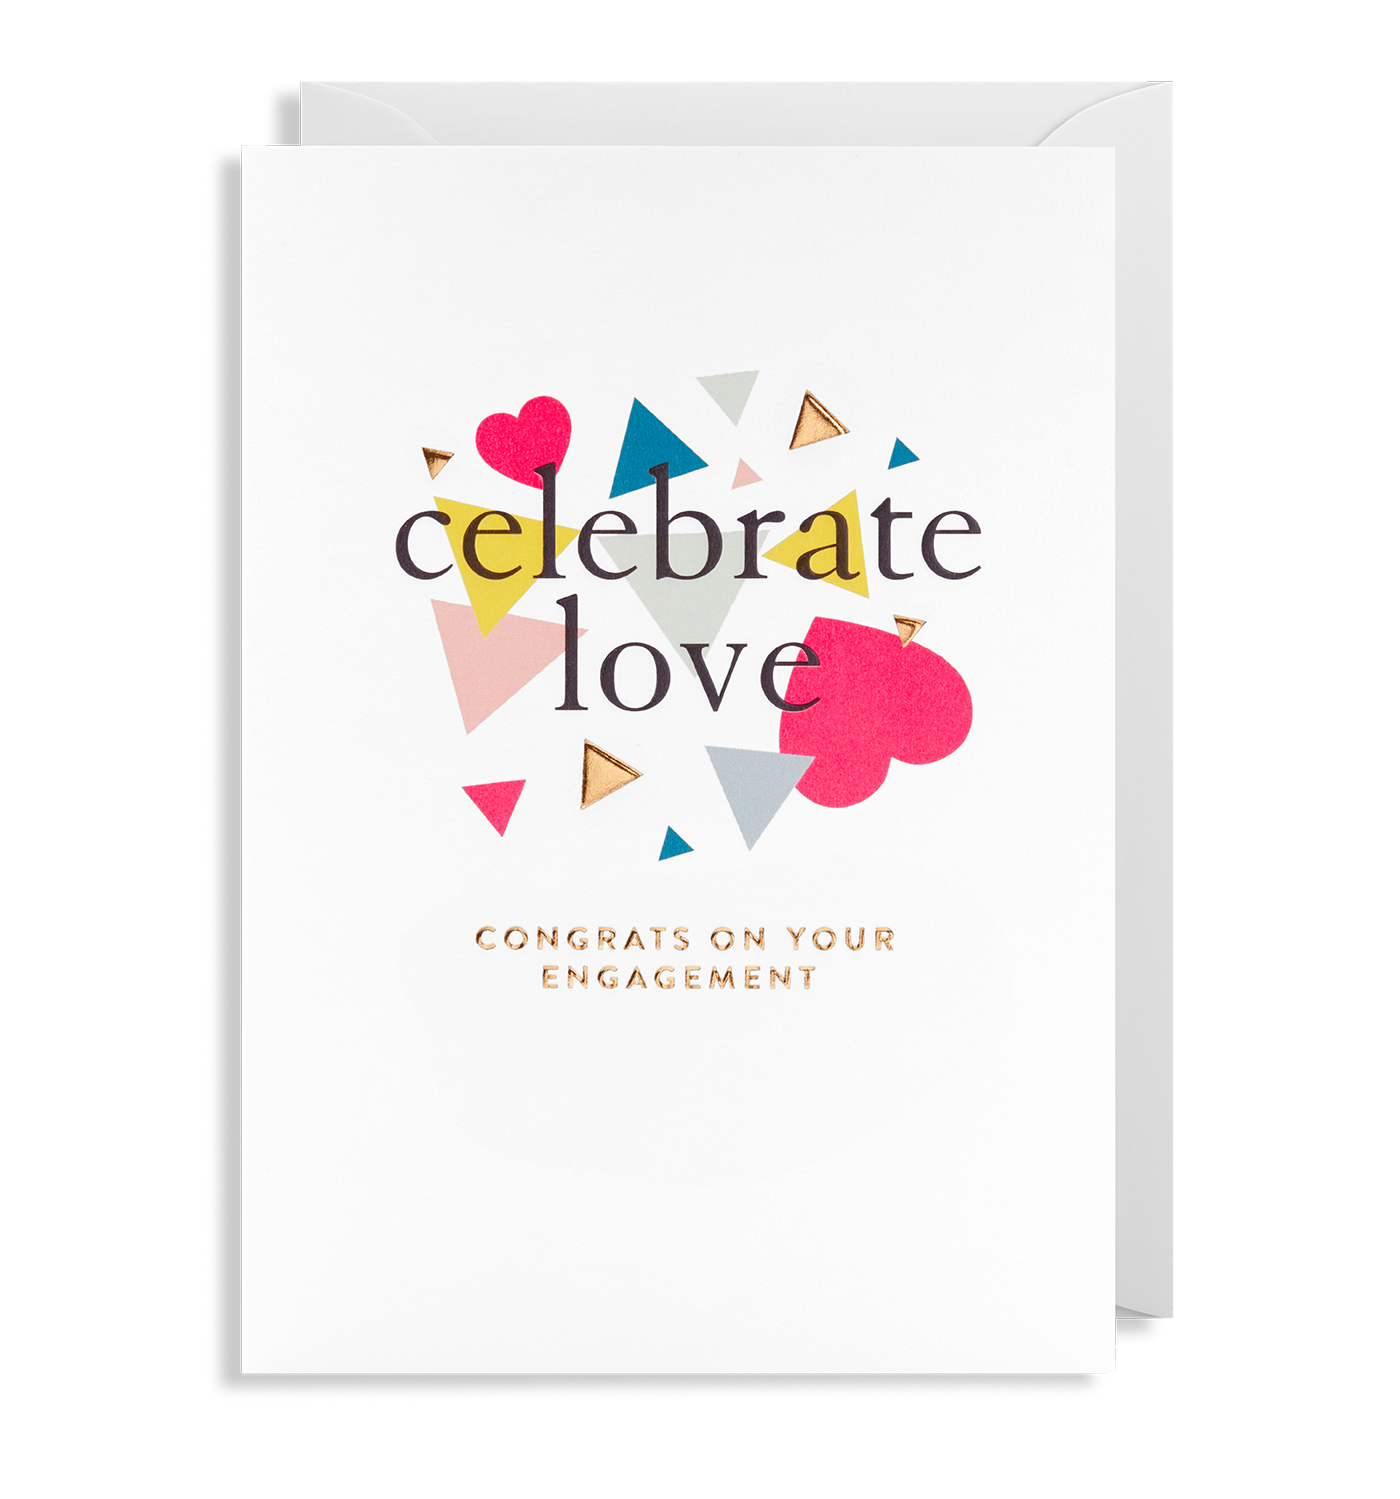 Congrats on Your Engagement! - Card